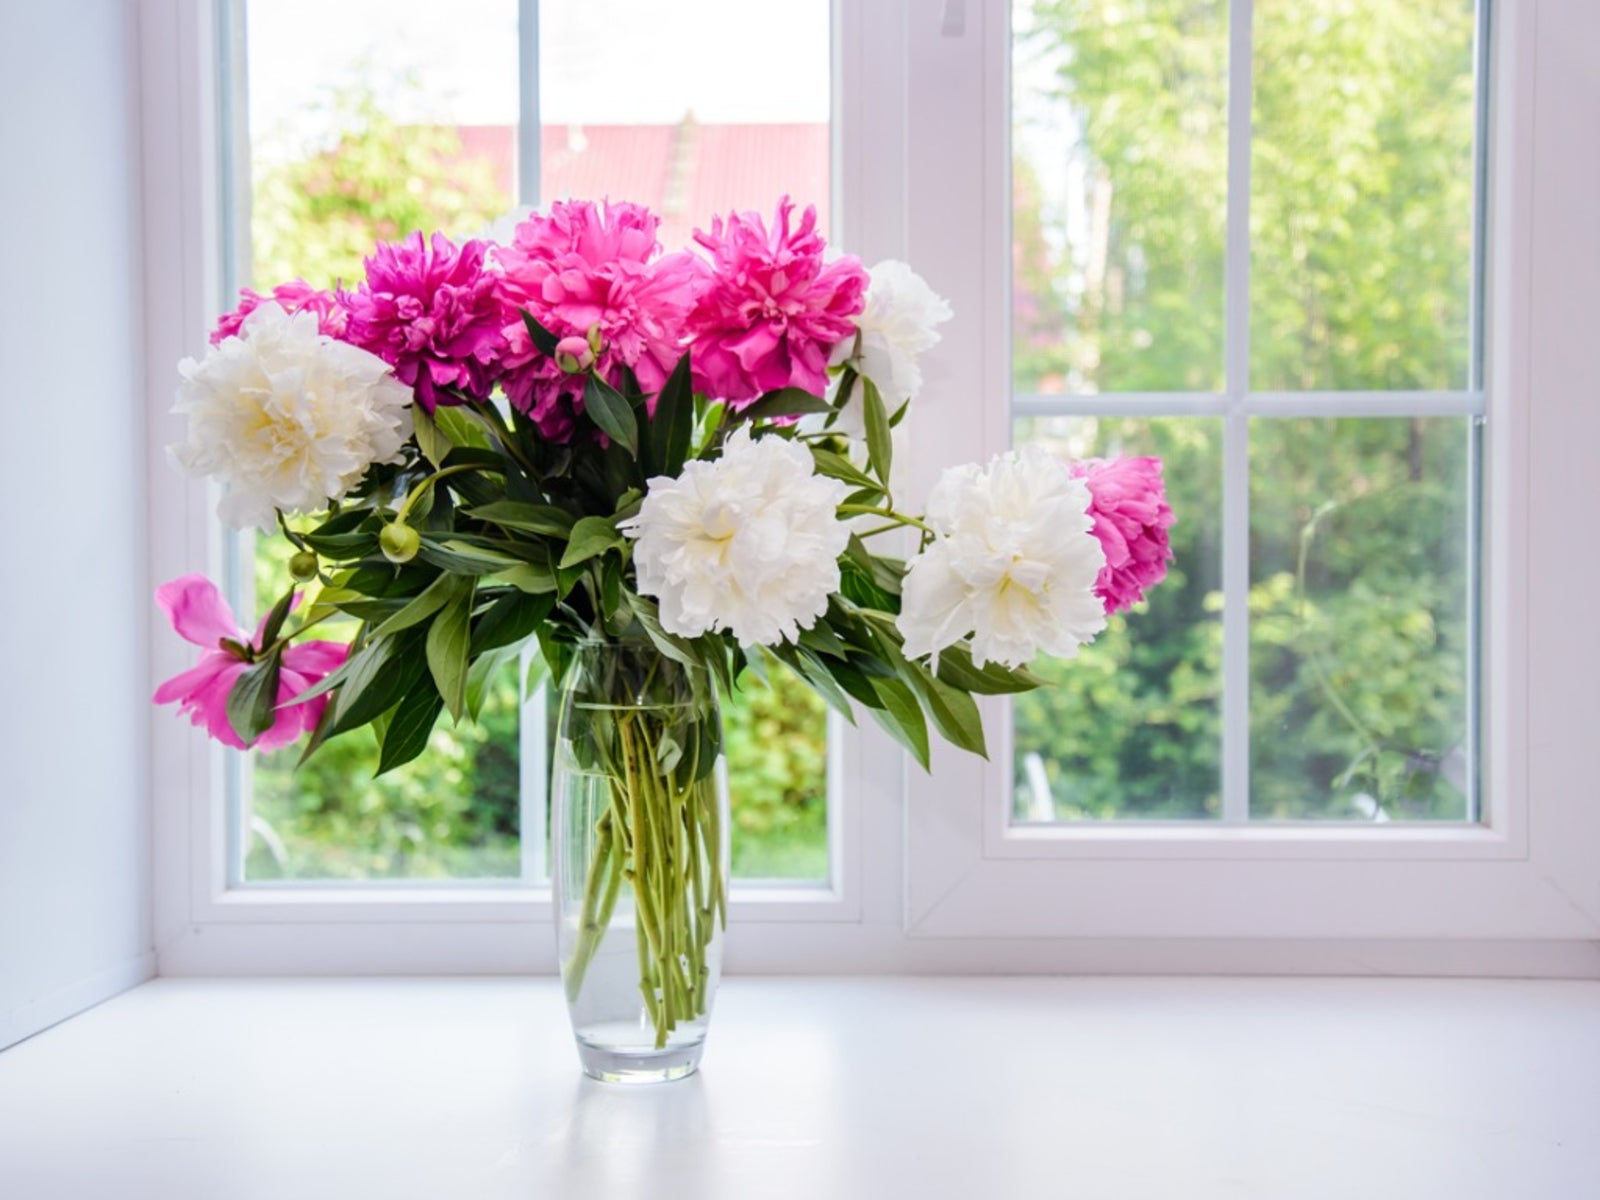 What To Put In Vase To Keep Flowers Alive
